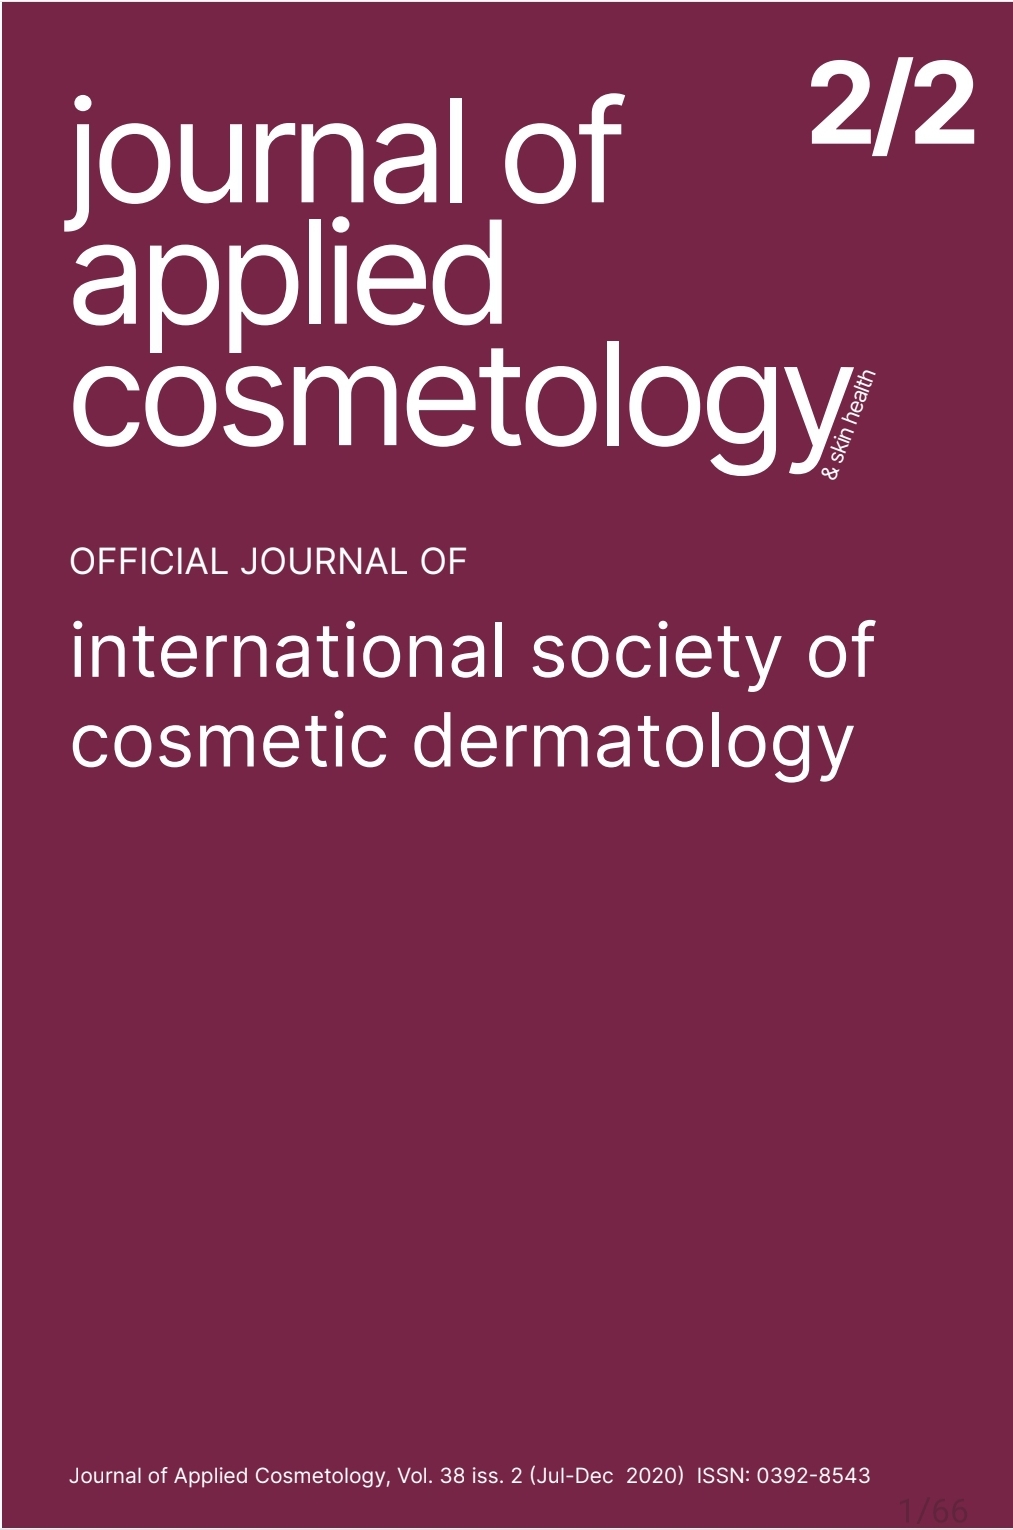 					View Vol. 38 No. 2 (2020): Journal of Applied Cosmetology
				